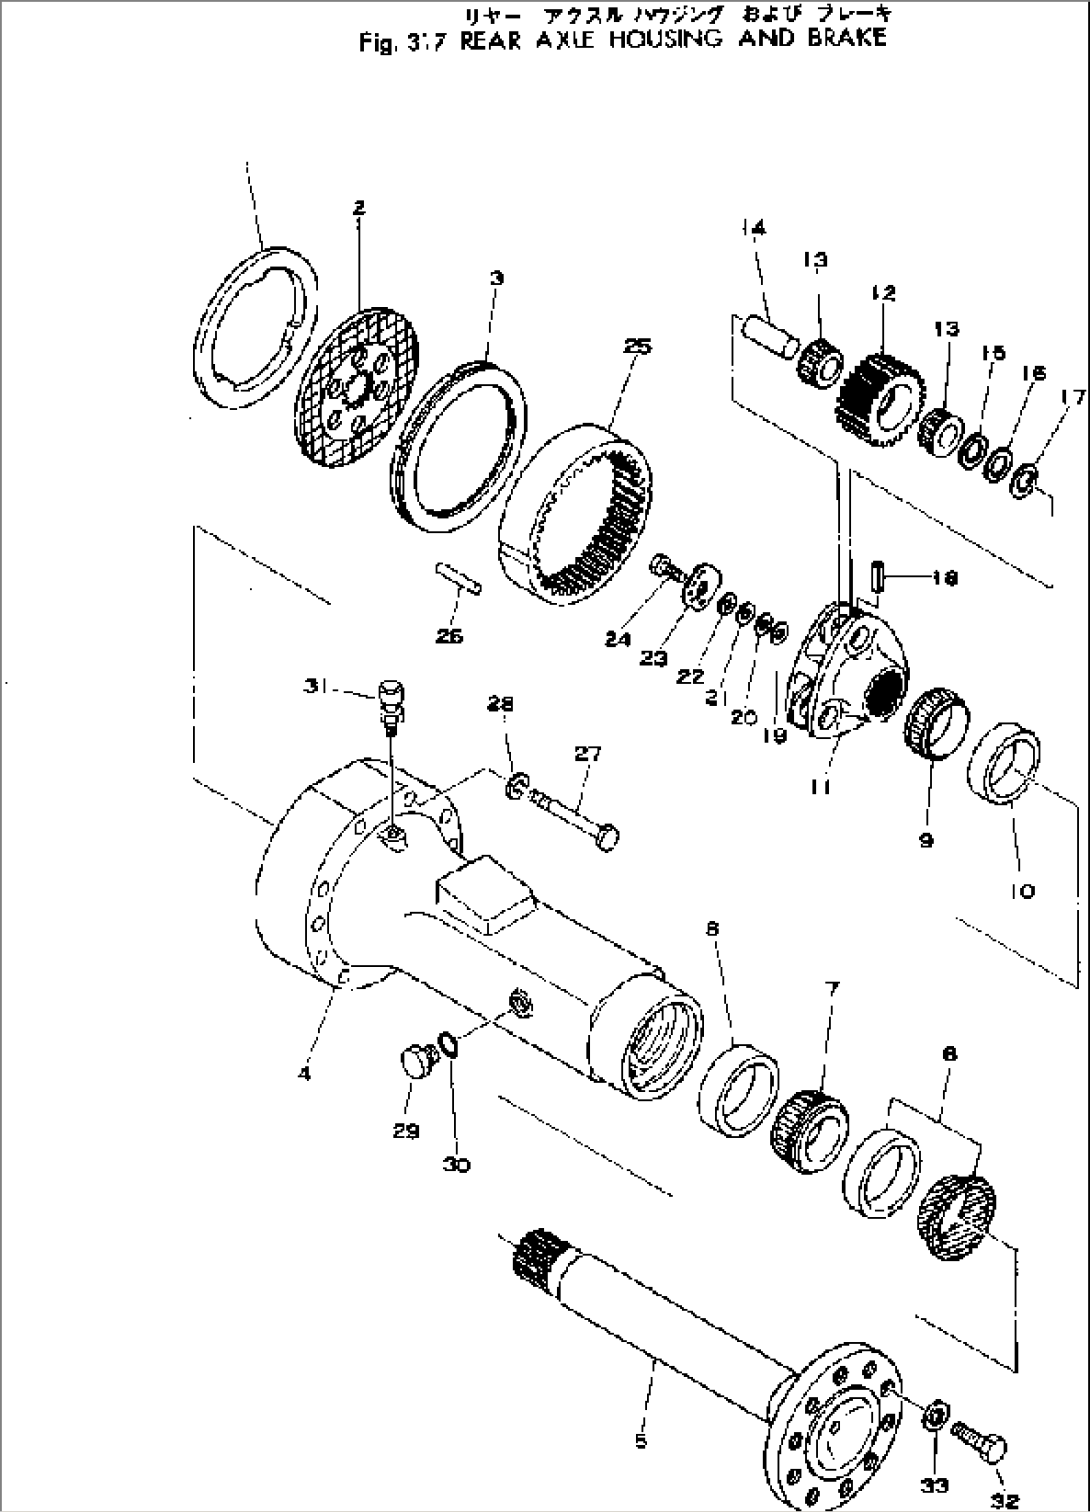 REAR AXLE HOUSING AND BRAKE